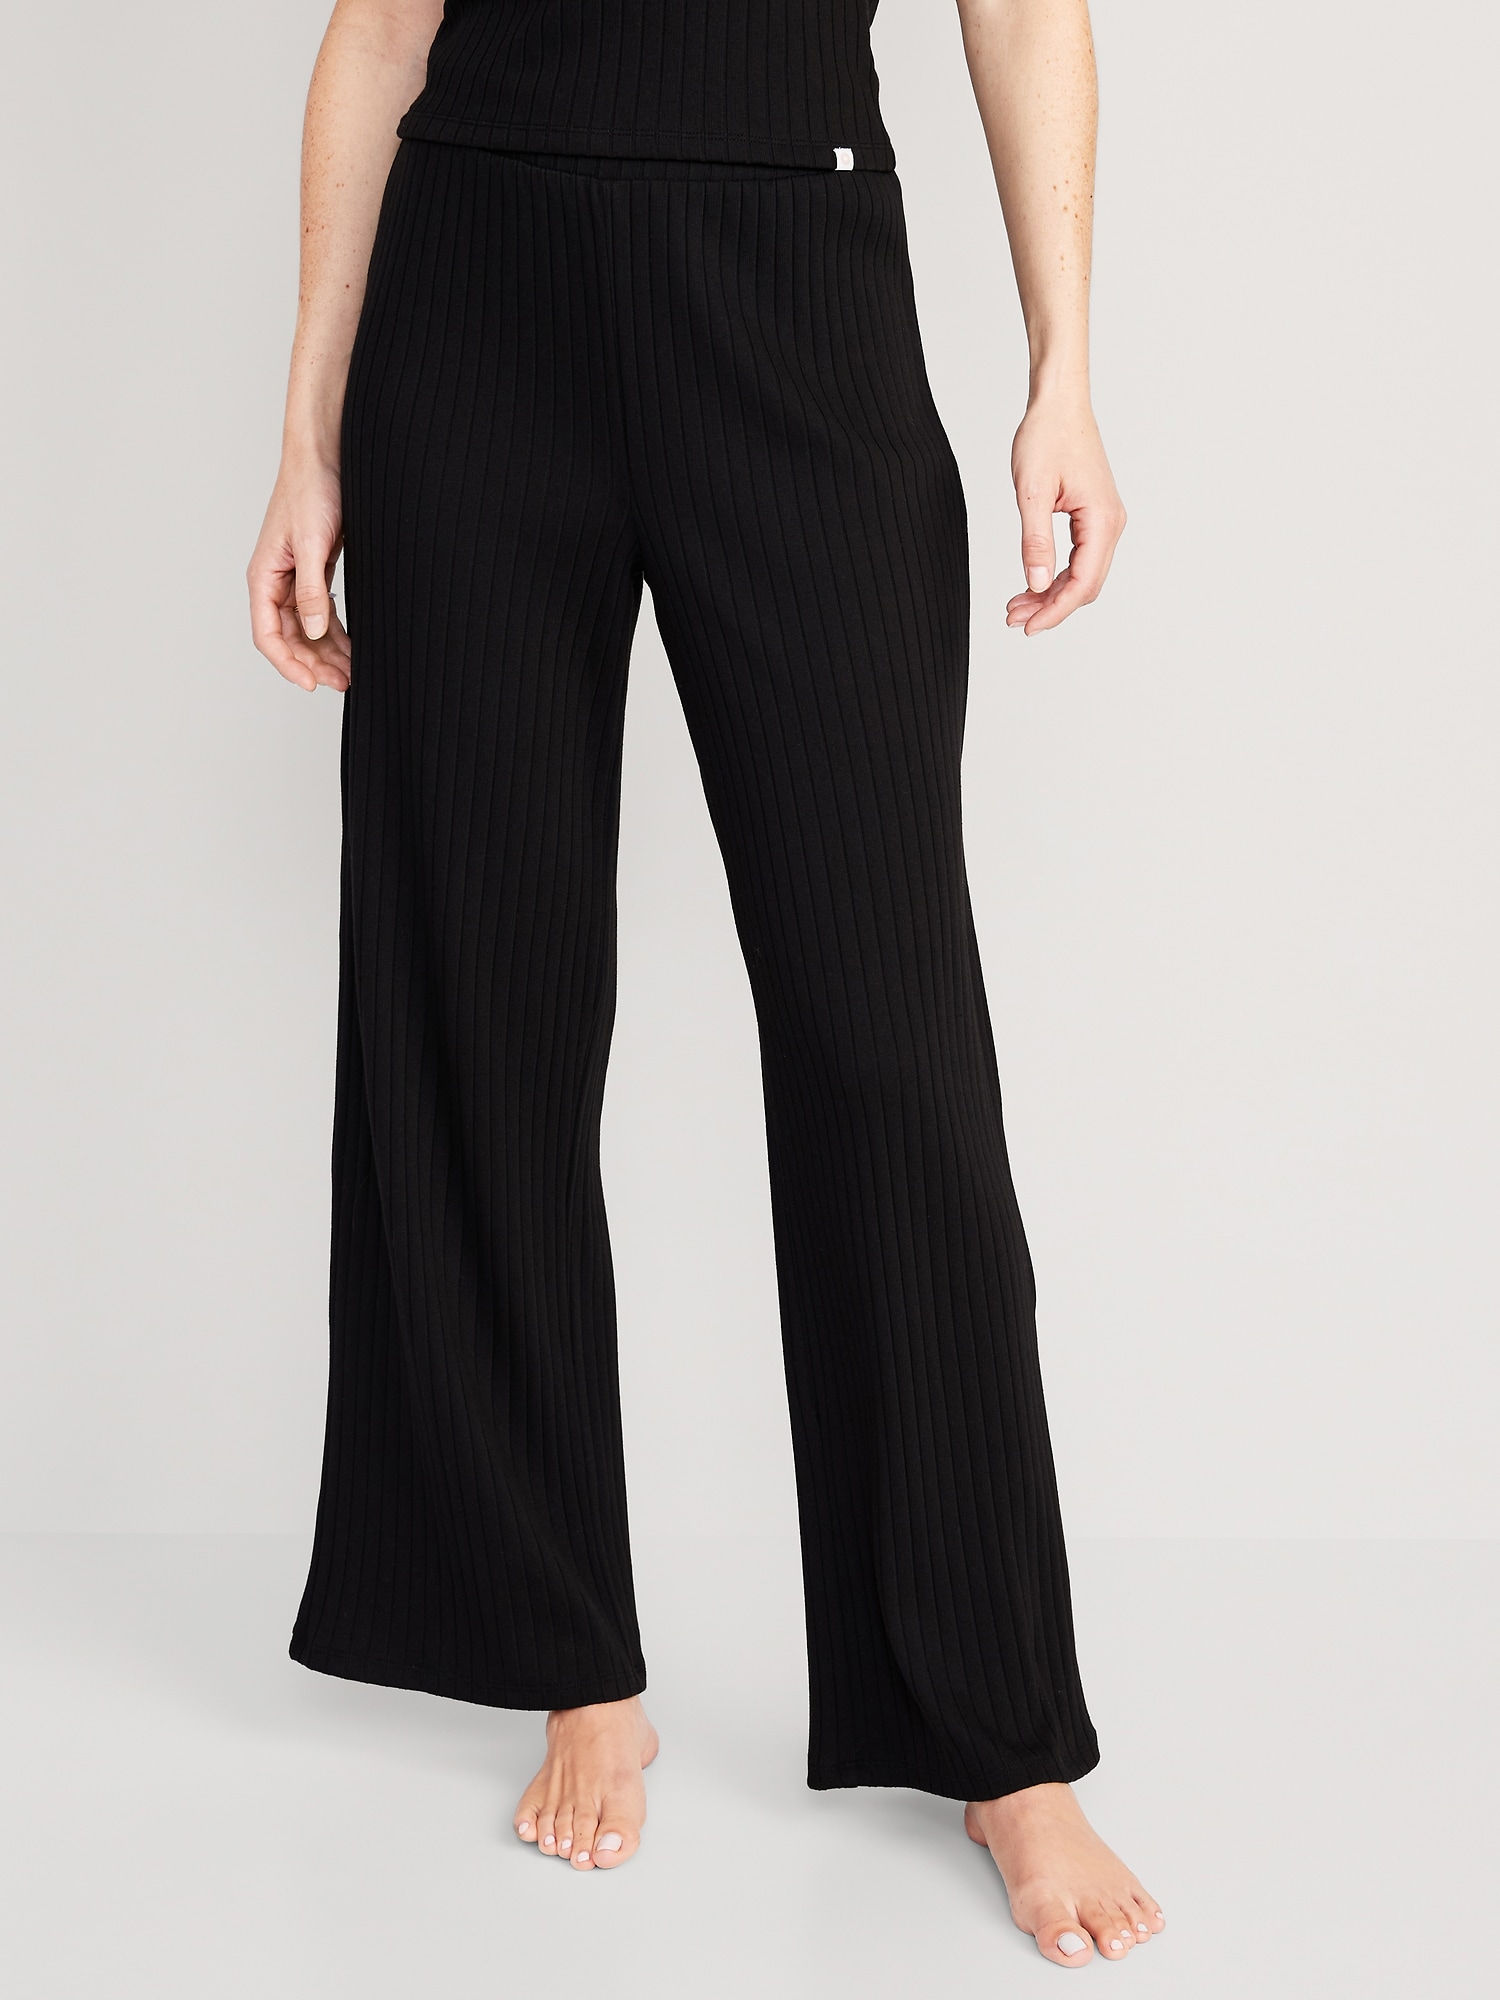 High-Waisted Rib-Knit Wide-Leg Pajama Pants for Women | Old Navy